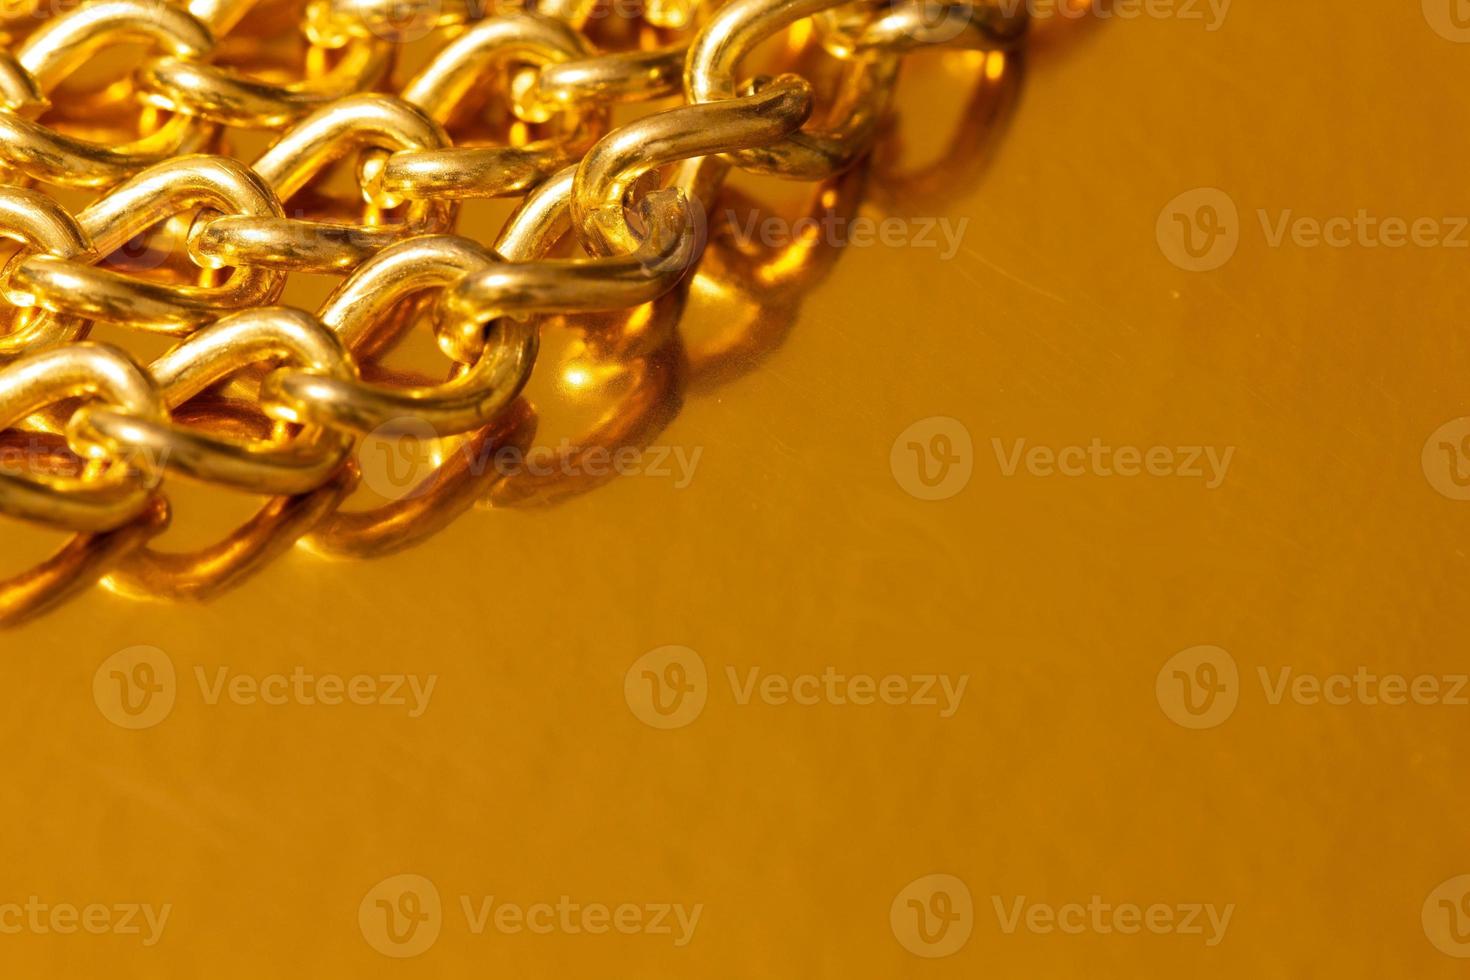 Golden chain. Detail of a yellow iron chain. Metal chain link on the gold background. Decorative jewelry. Luxury design brilliant jewelry. Macro photo for ads, flyers. Copy space for text. Close-up